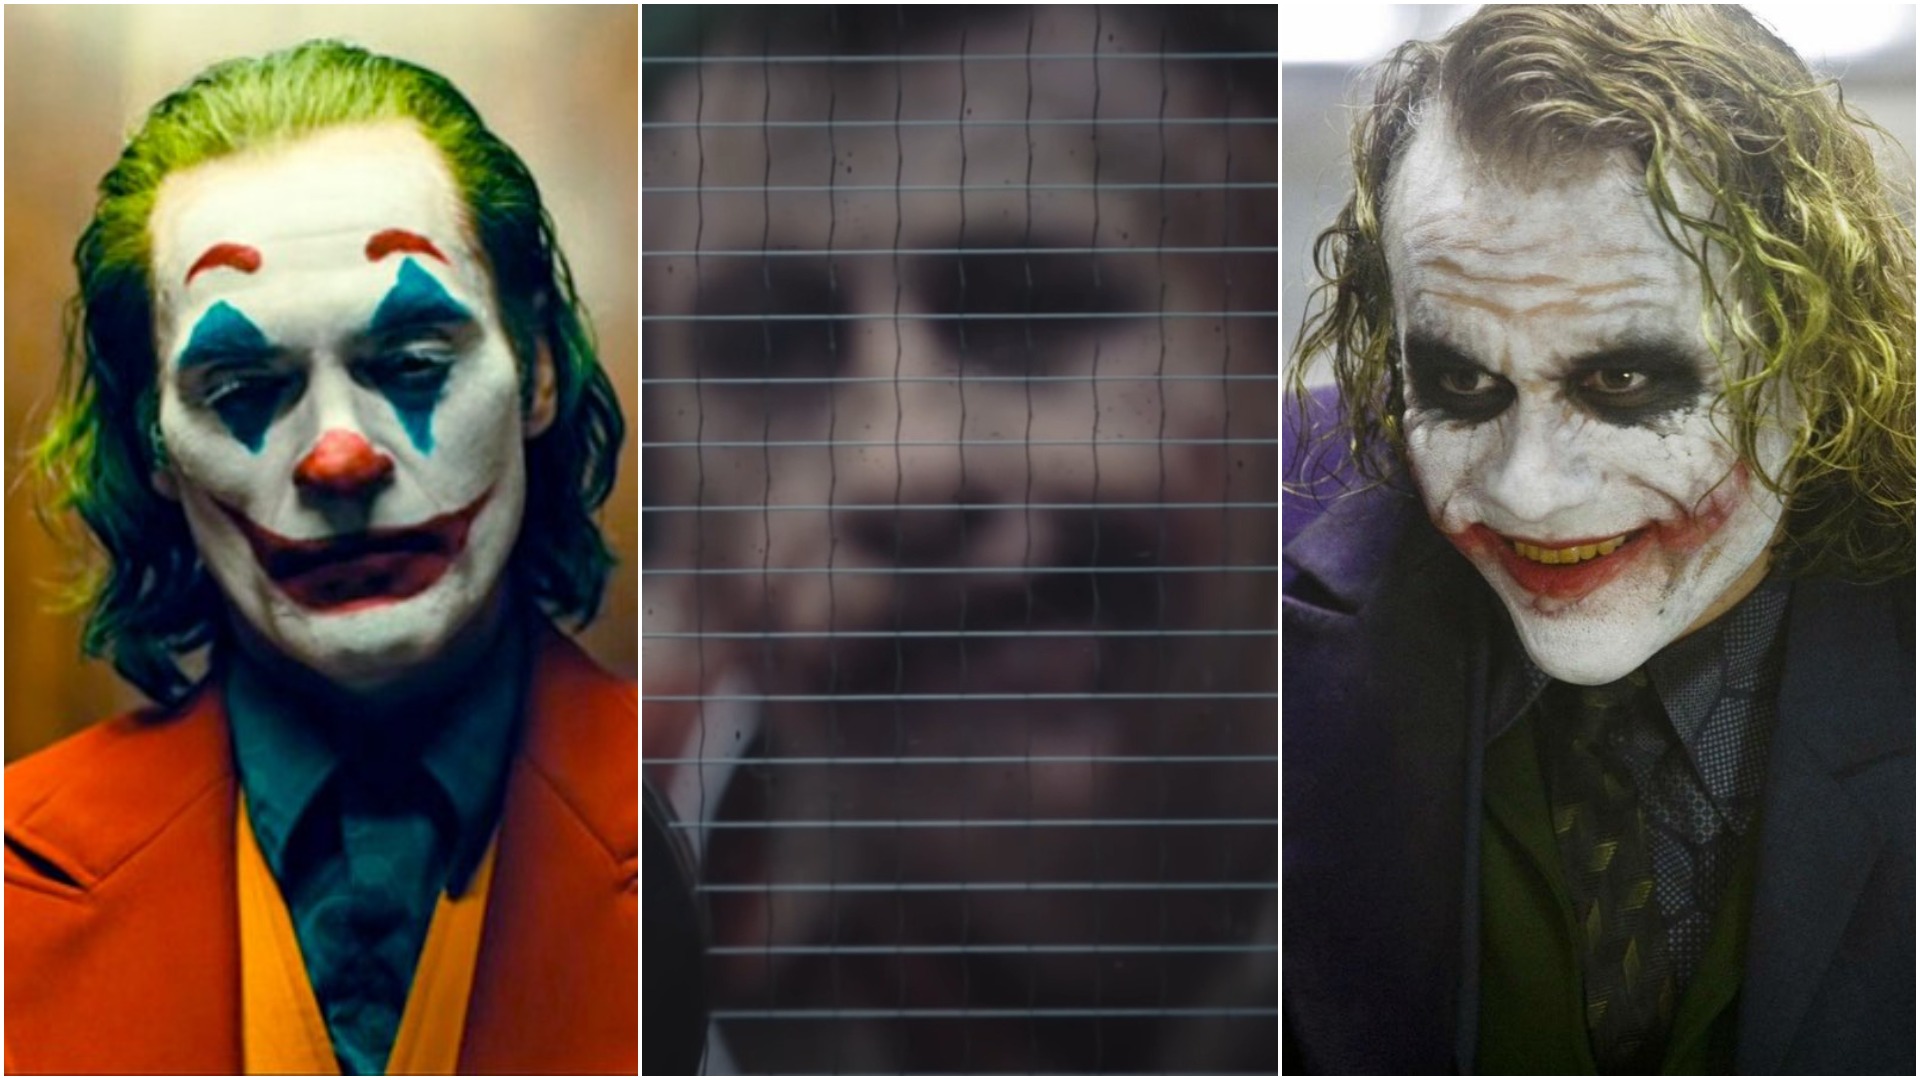 The new Joker movie is so dark people are actually walking out  PopBuzz